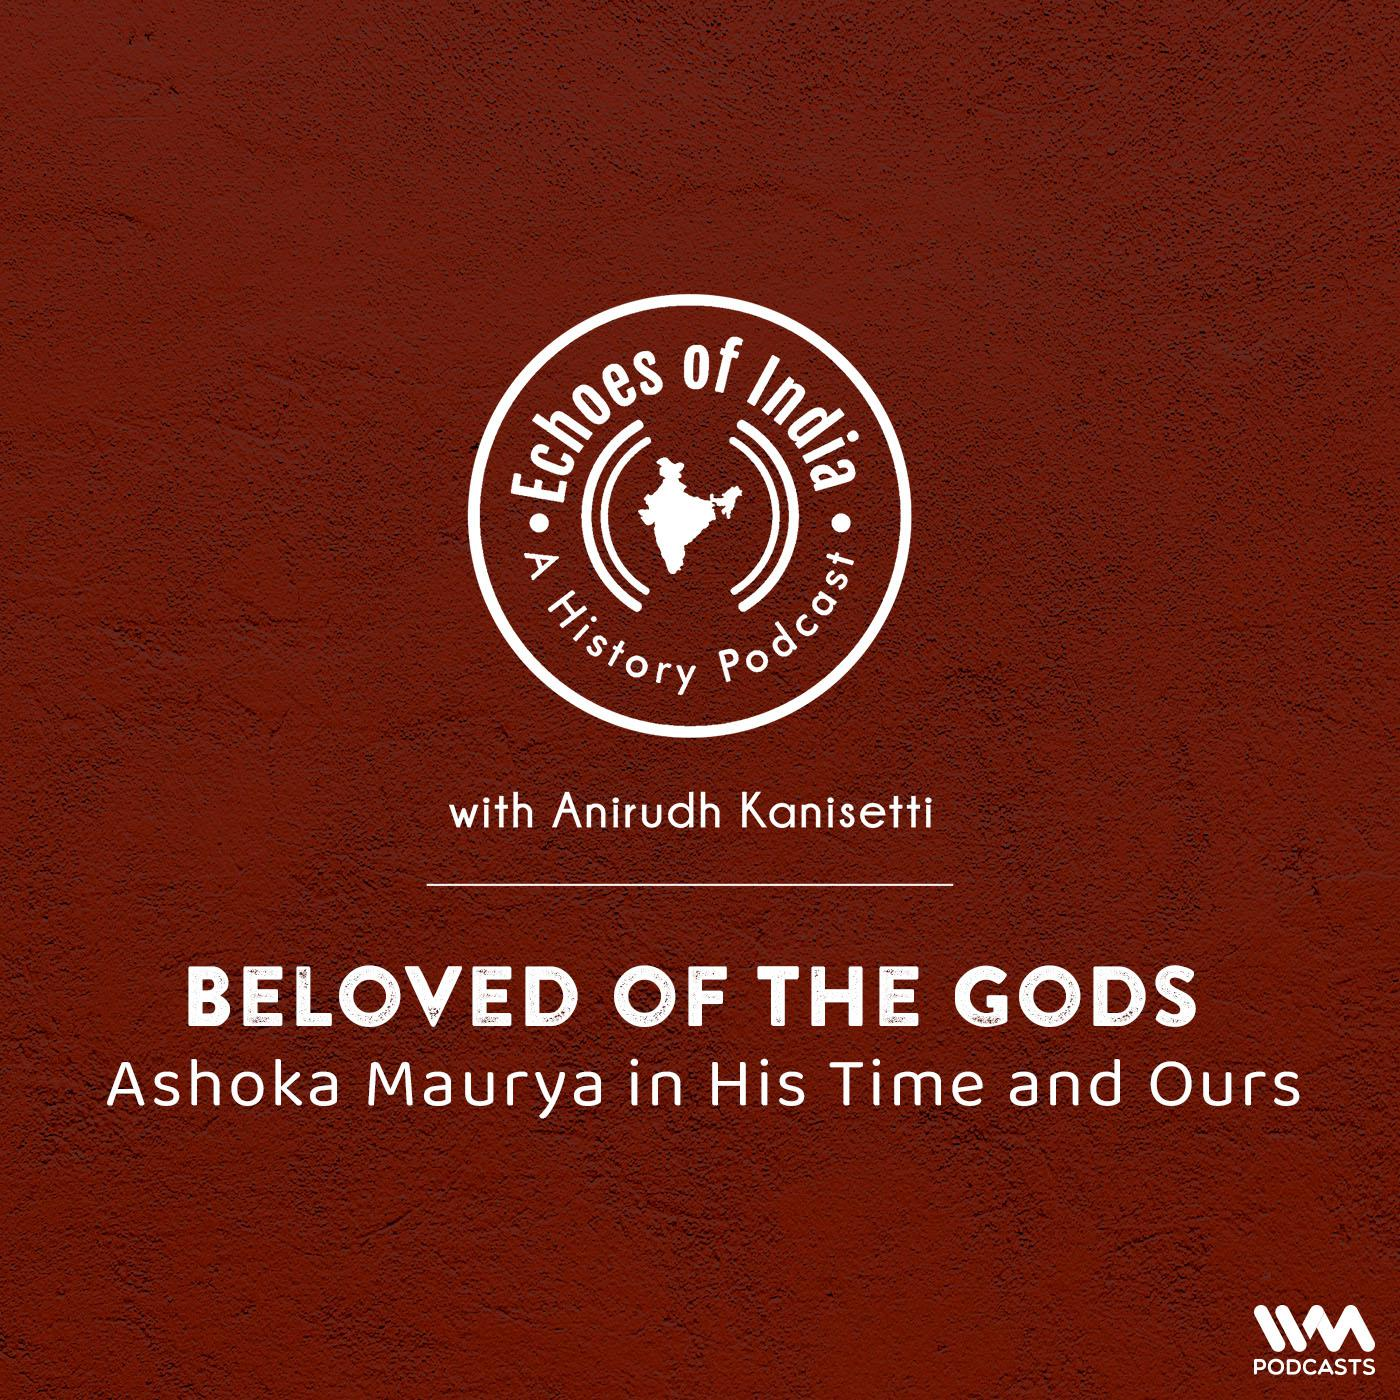 Beloved of the Gods: Ashoka Maurya in His Time and Ours